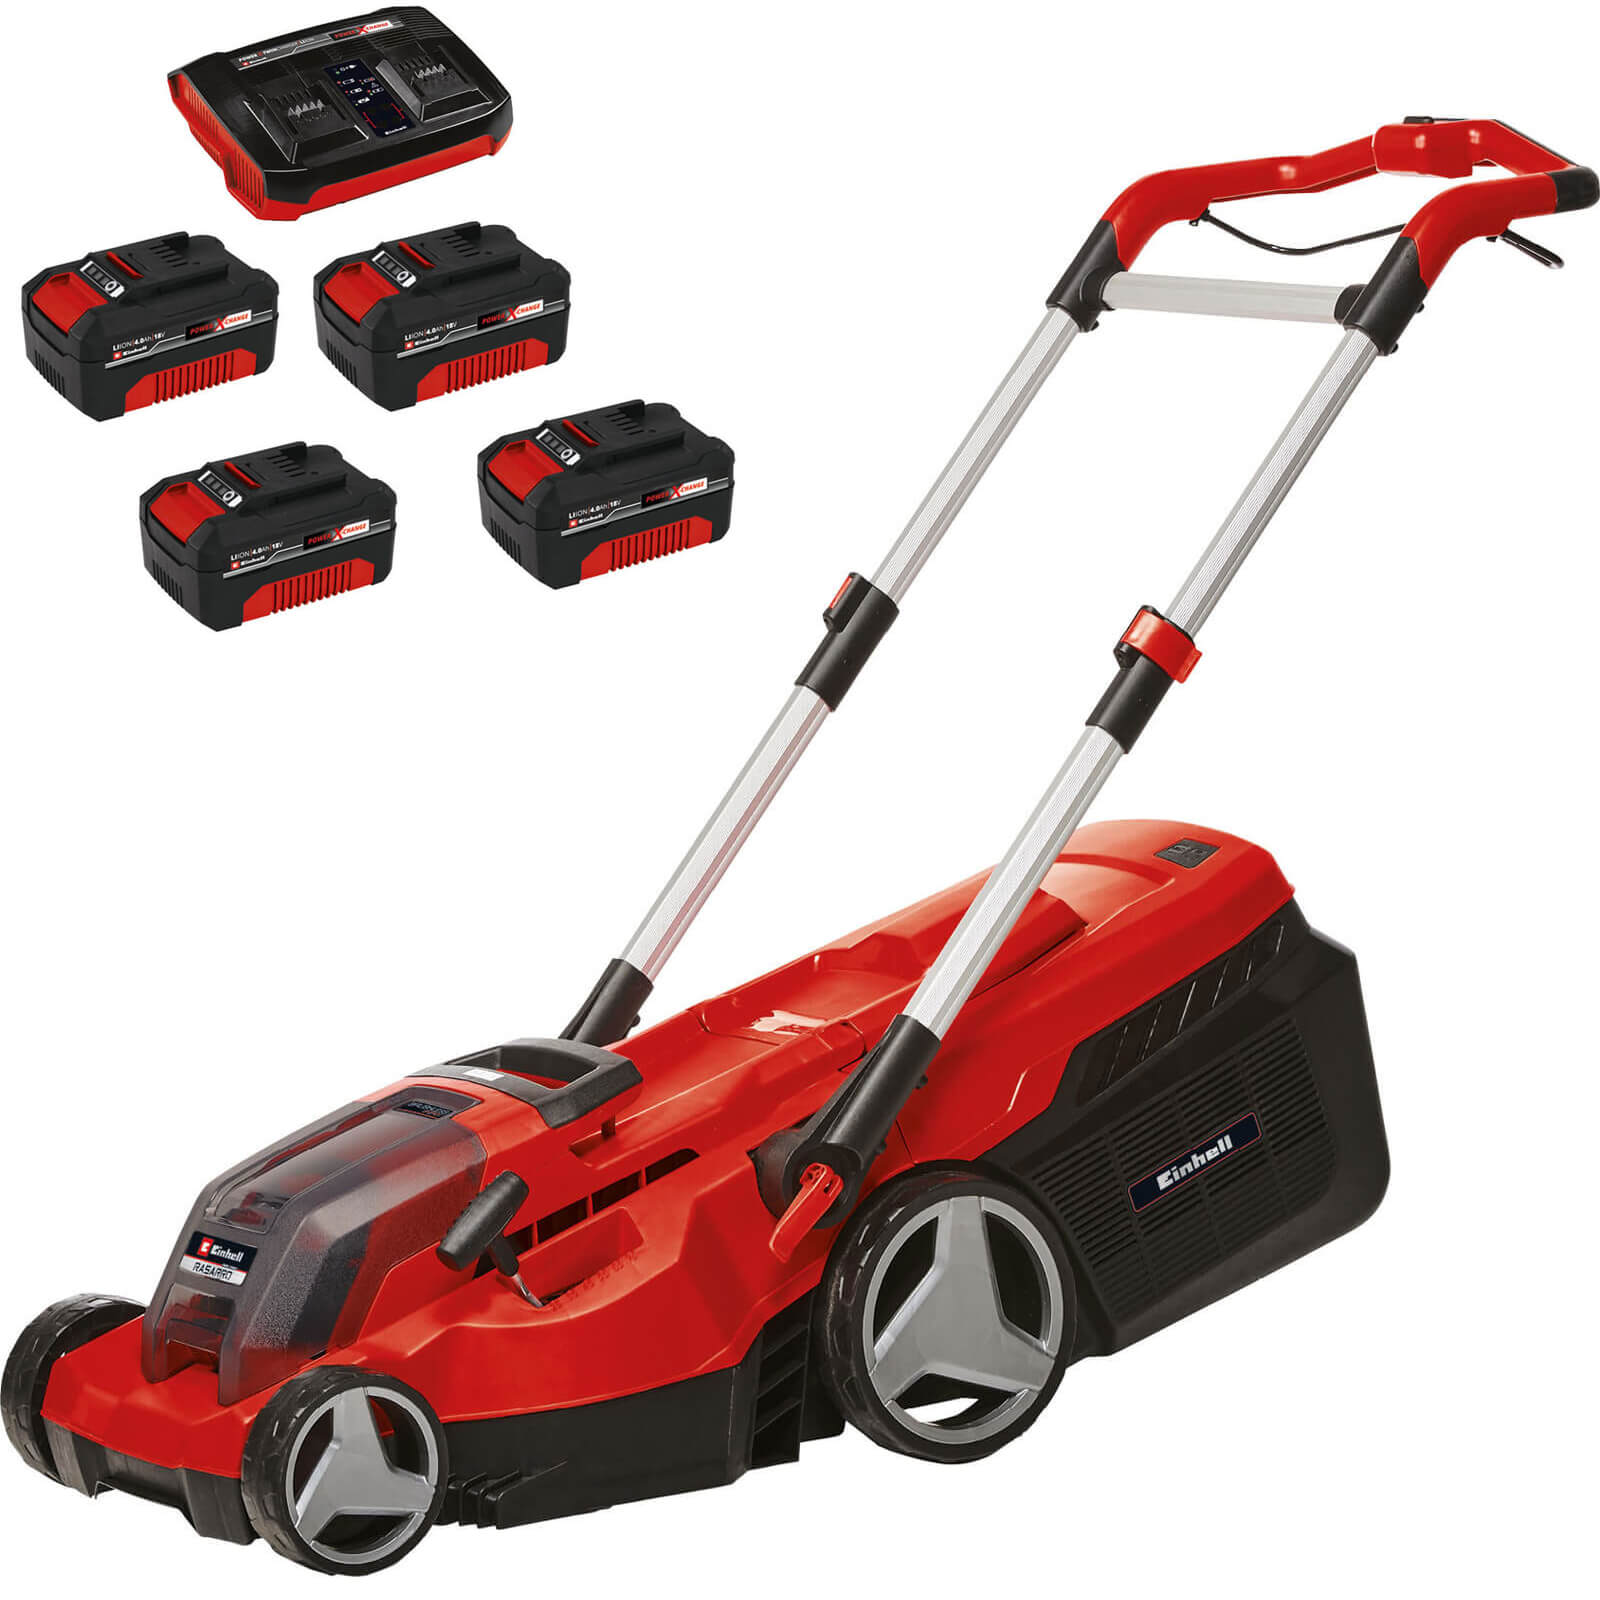 Image of Einhell RASARRO 36/38 36v Cordless Brushless Rotary Lawnmower 380mm 4 x 4ah Li-ion Twin Battery Charger